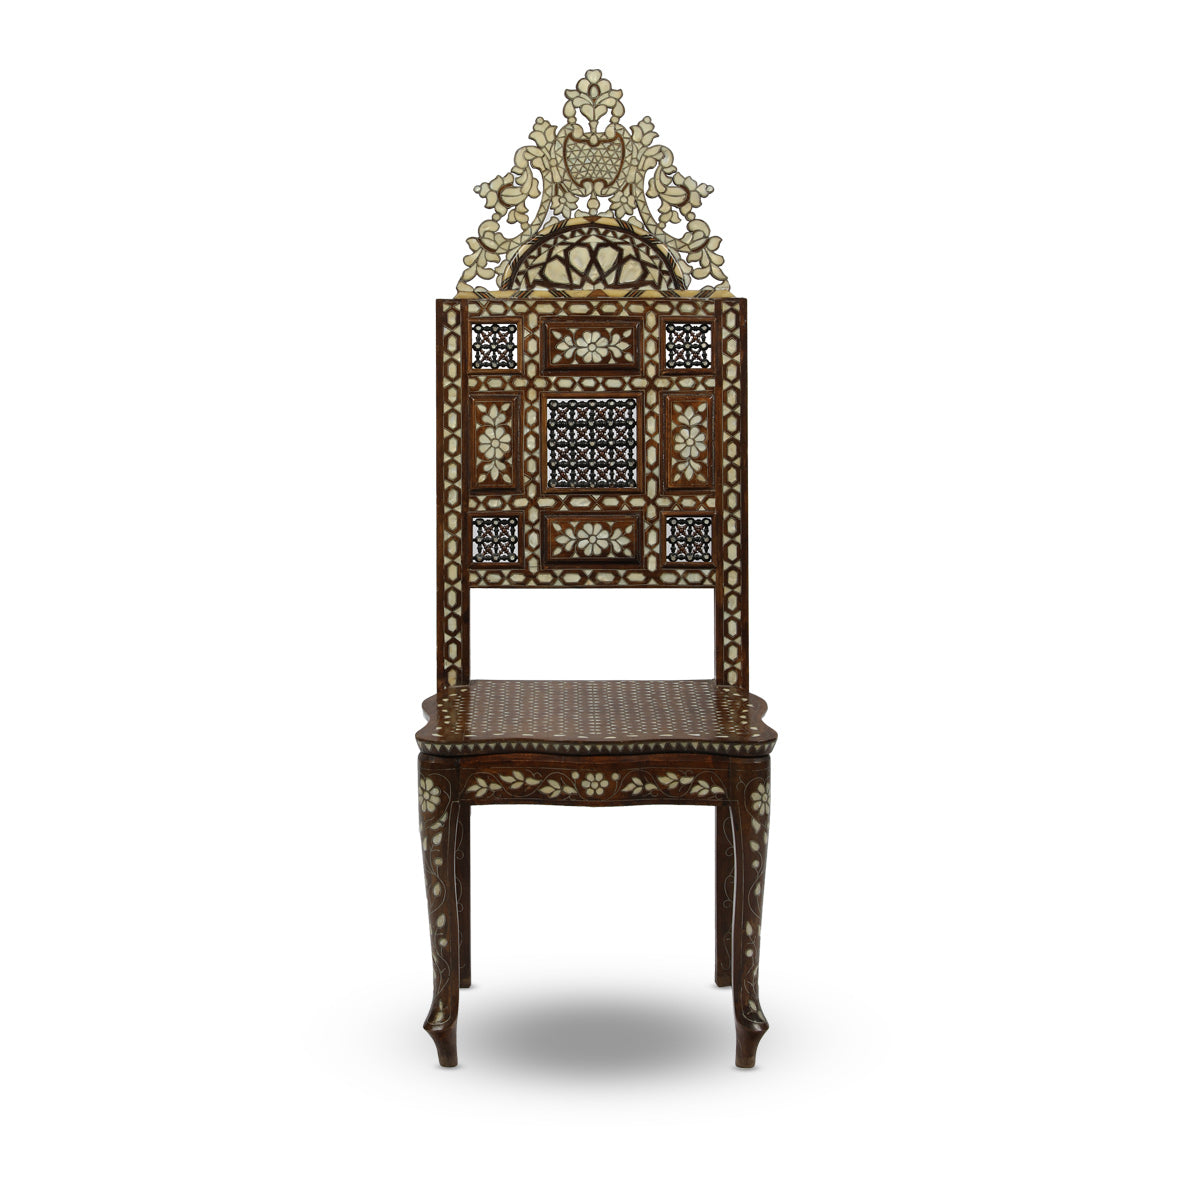 Front View of Mother of Pearl Inlaid Syrian Flat Seater Chair